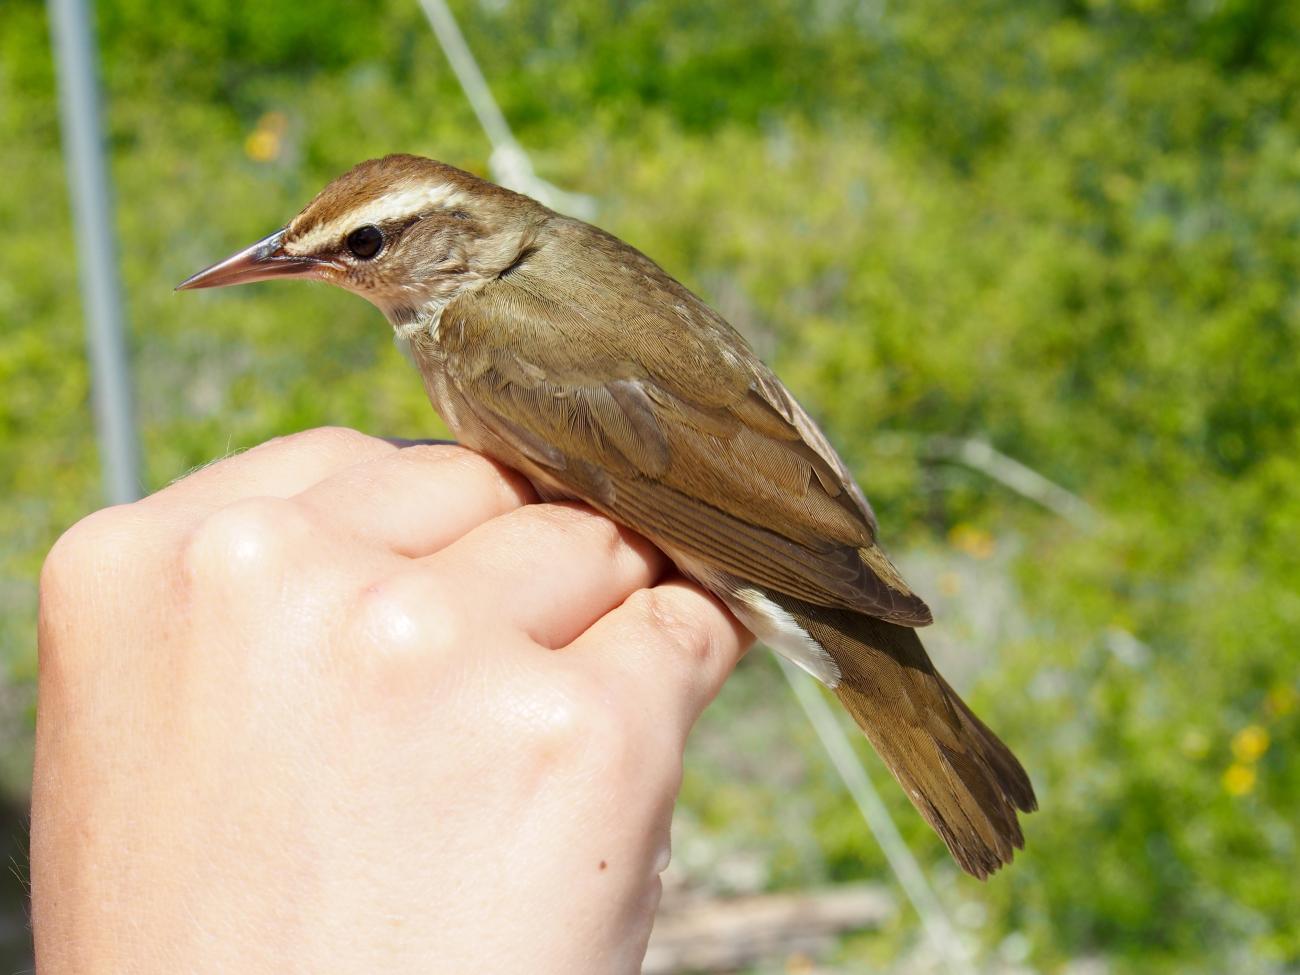 A Swainson's warbler perched on a person's hand